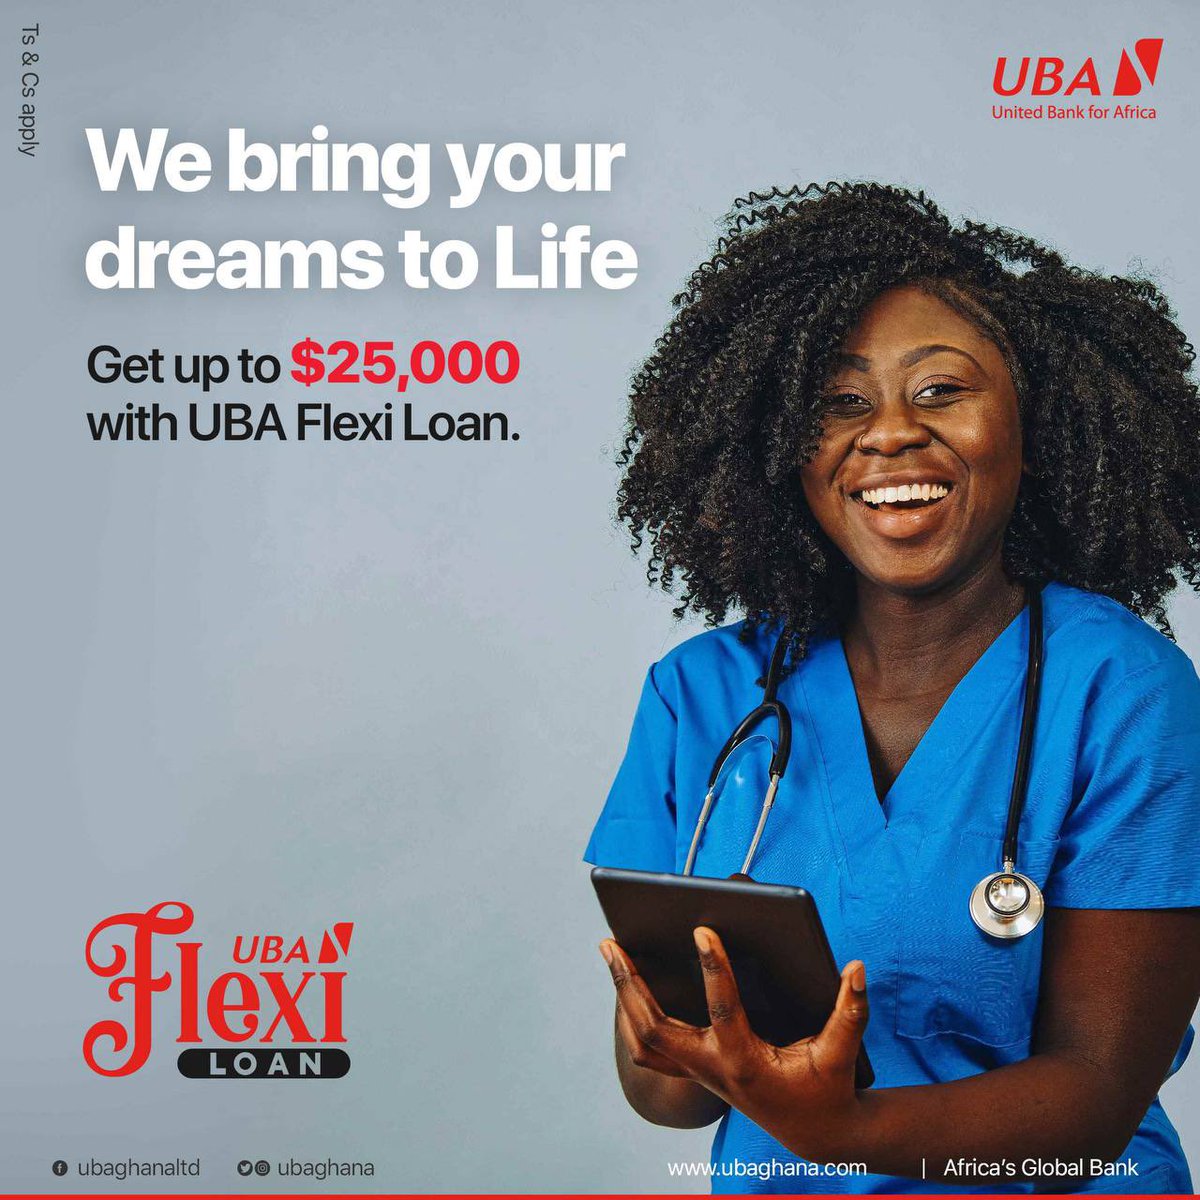 Get up to $25,000 with UBA Flexi Loan 

#AfricasGlobalBank